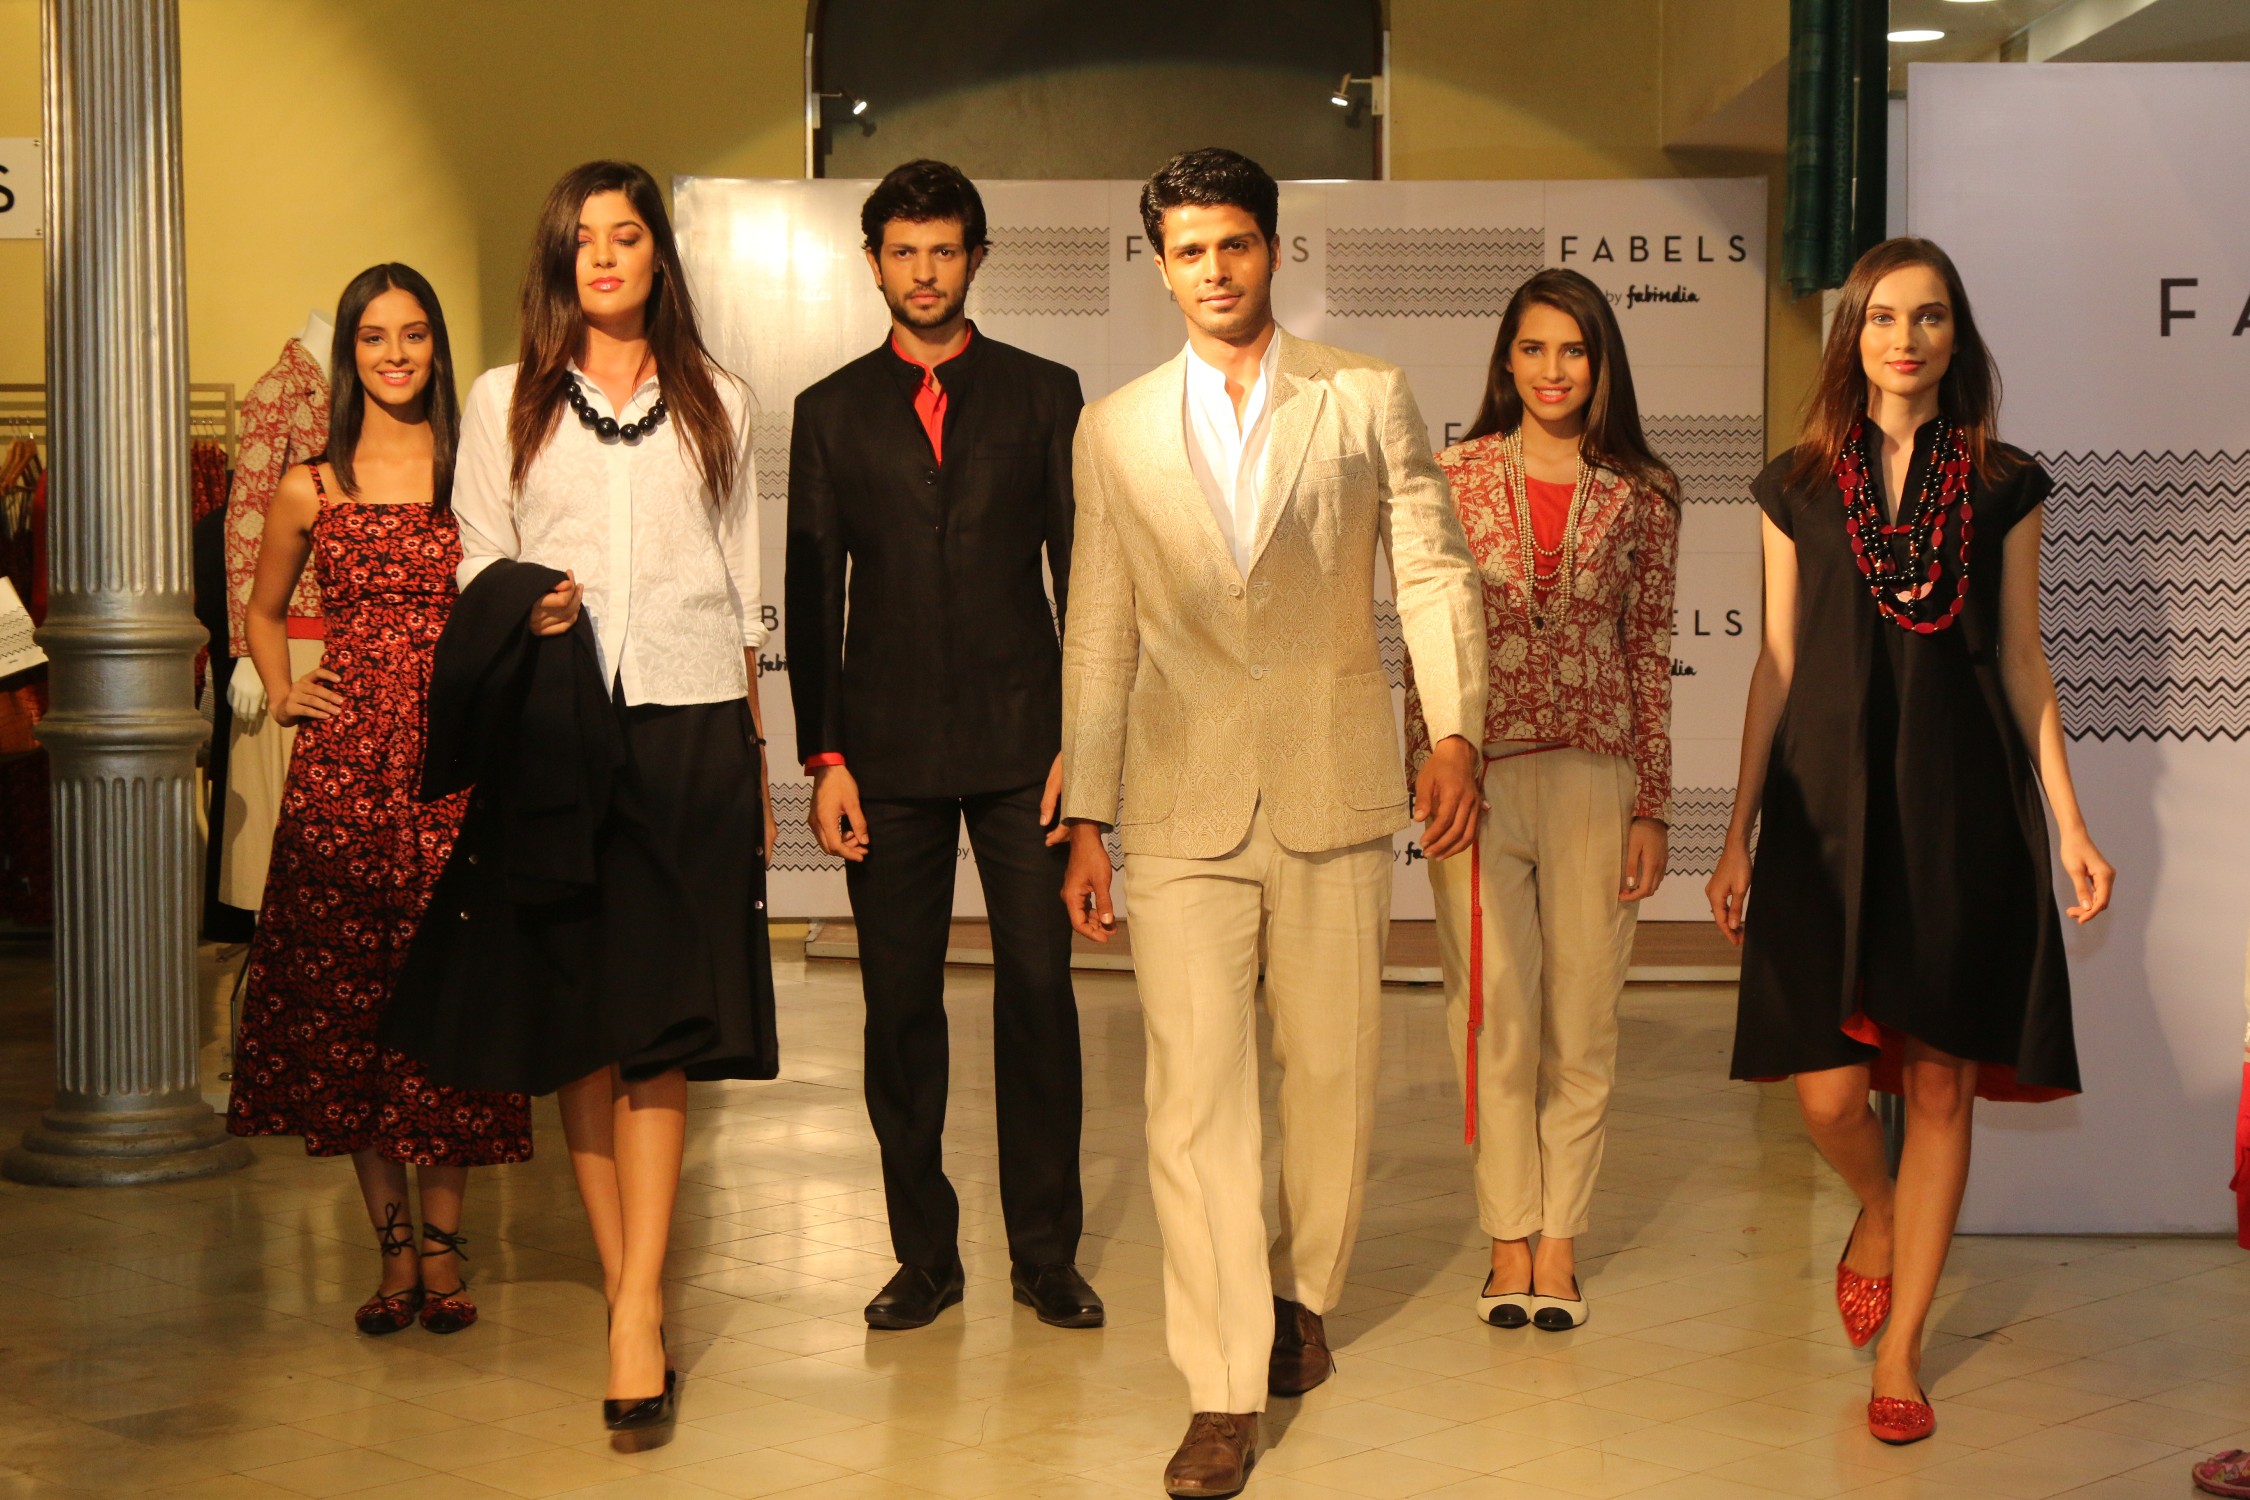 Models walking with FABELS outfits